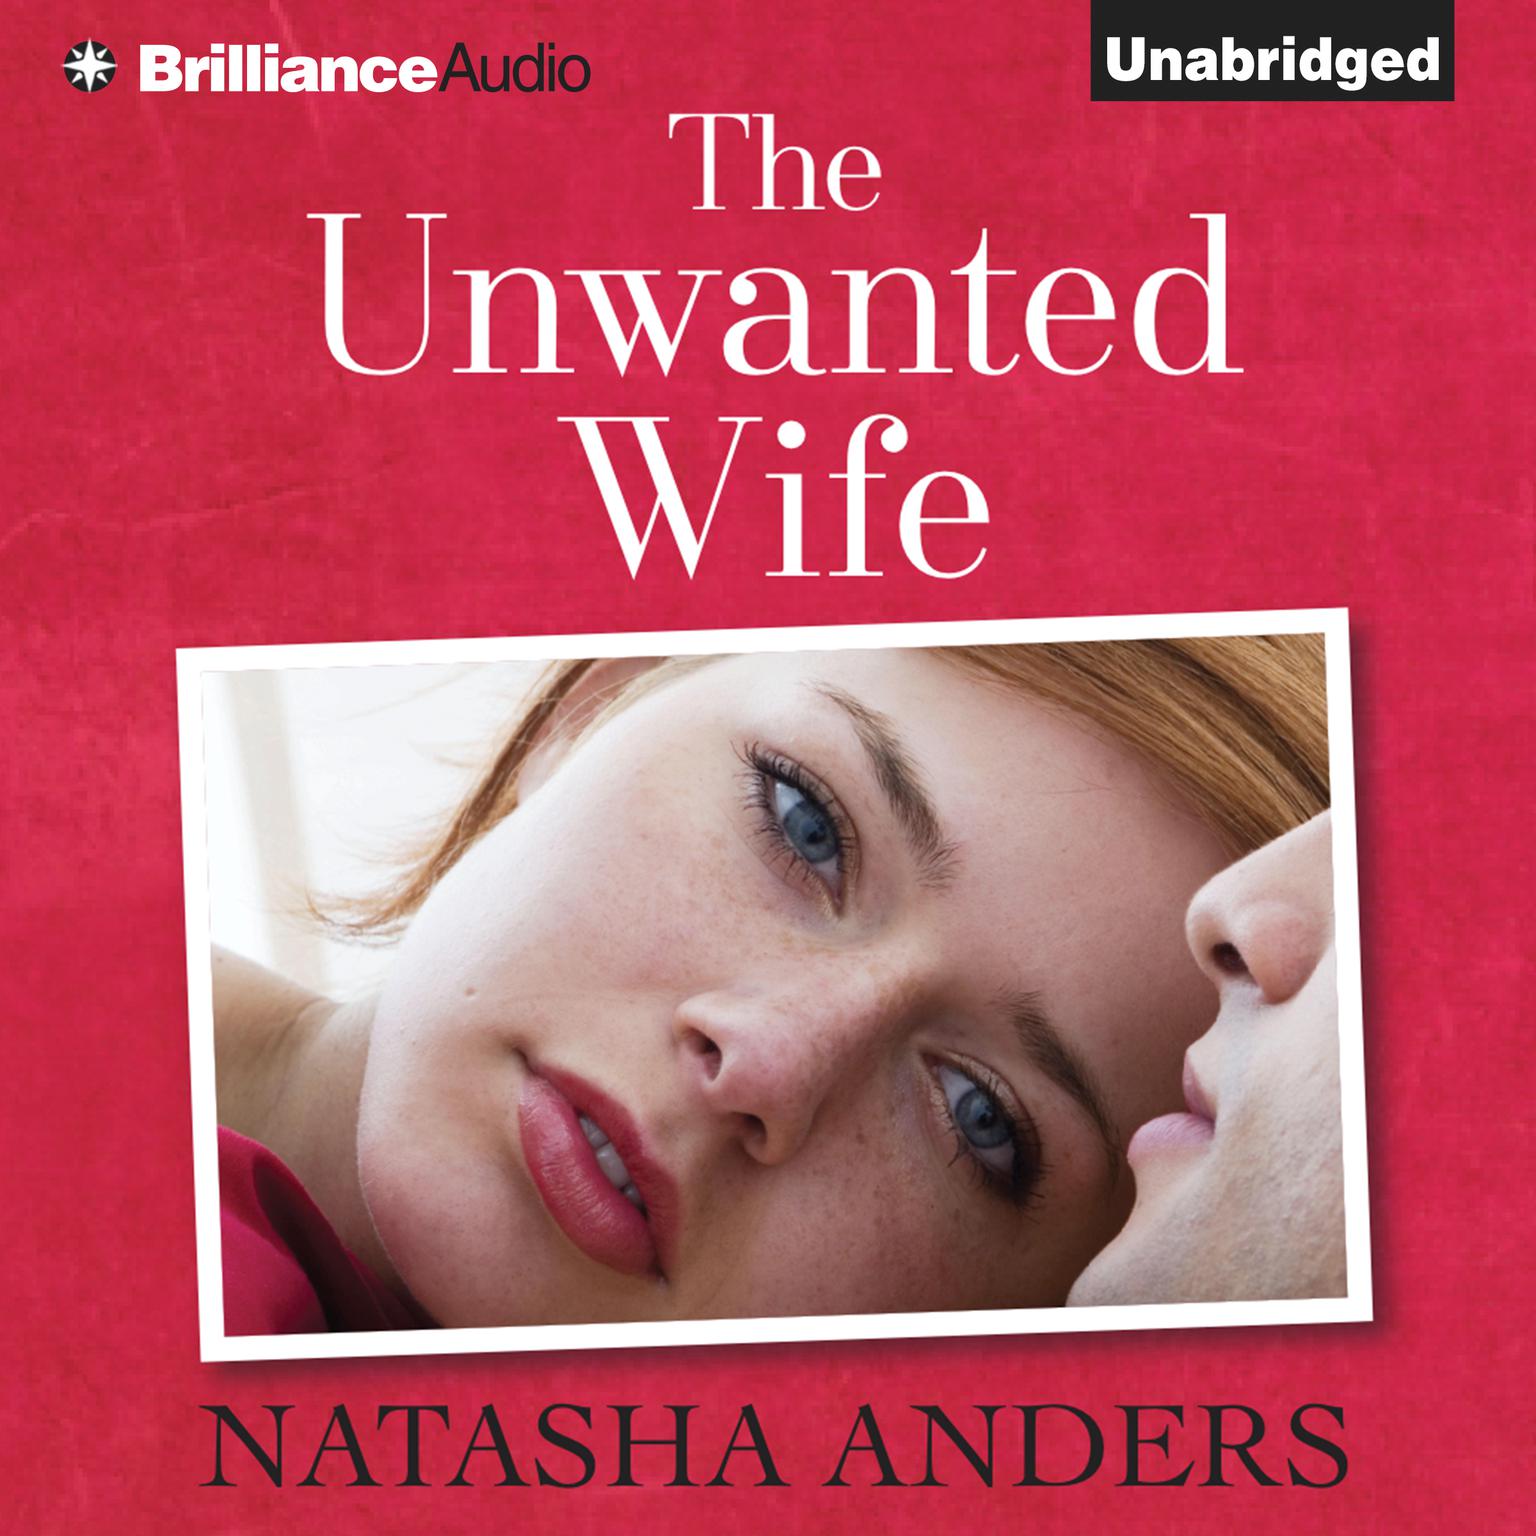 The Unwanted Wife Audiobook By Natasha Anders — Listen Instantly